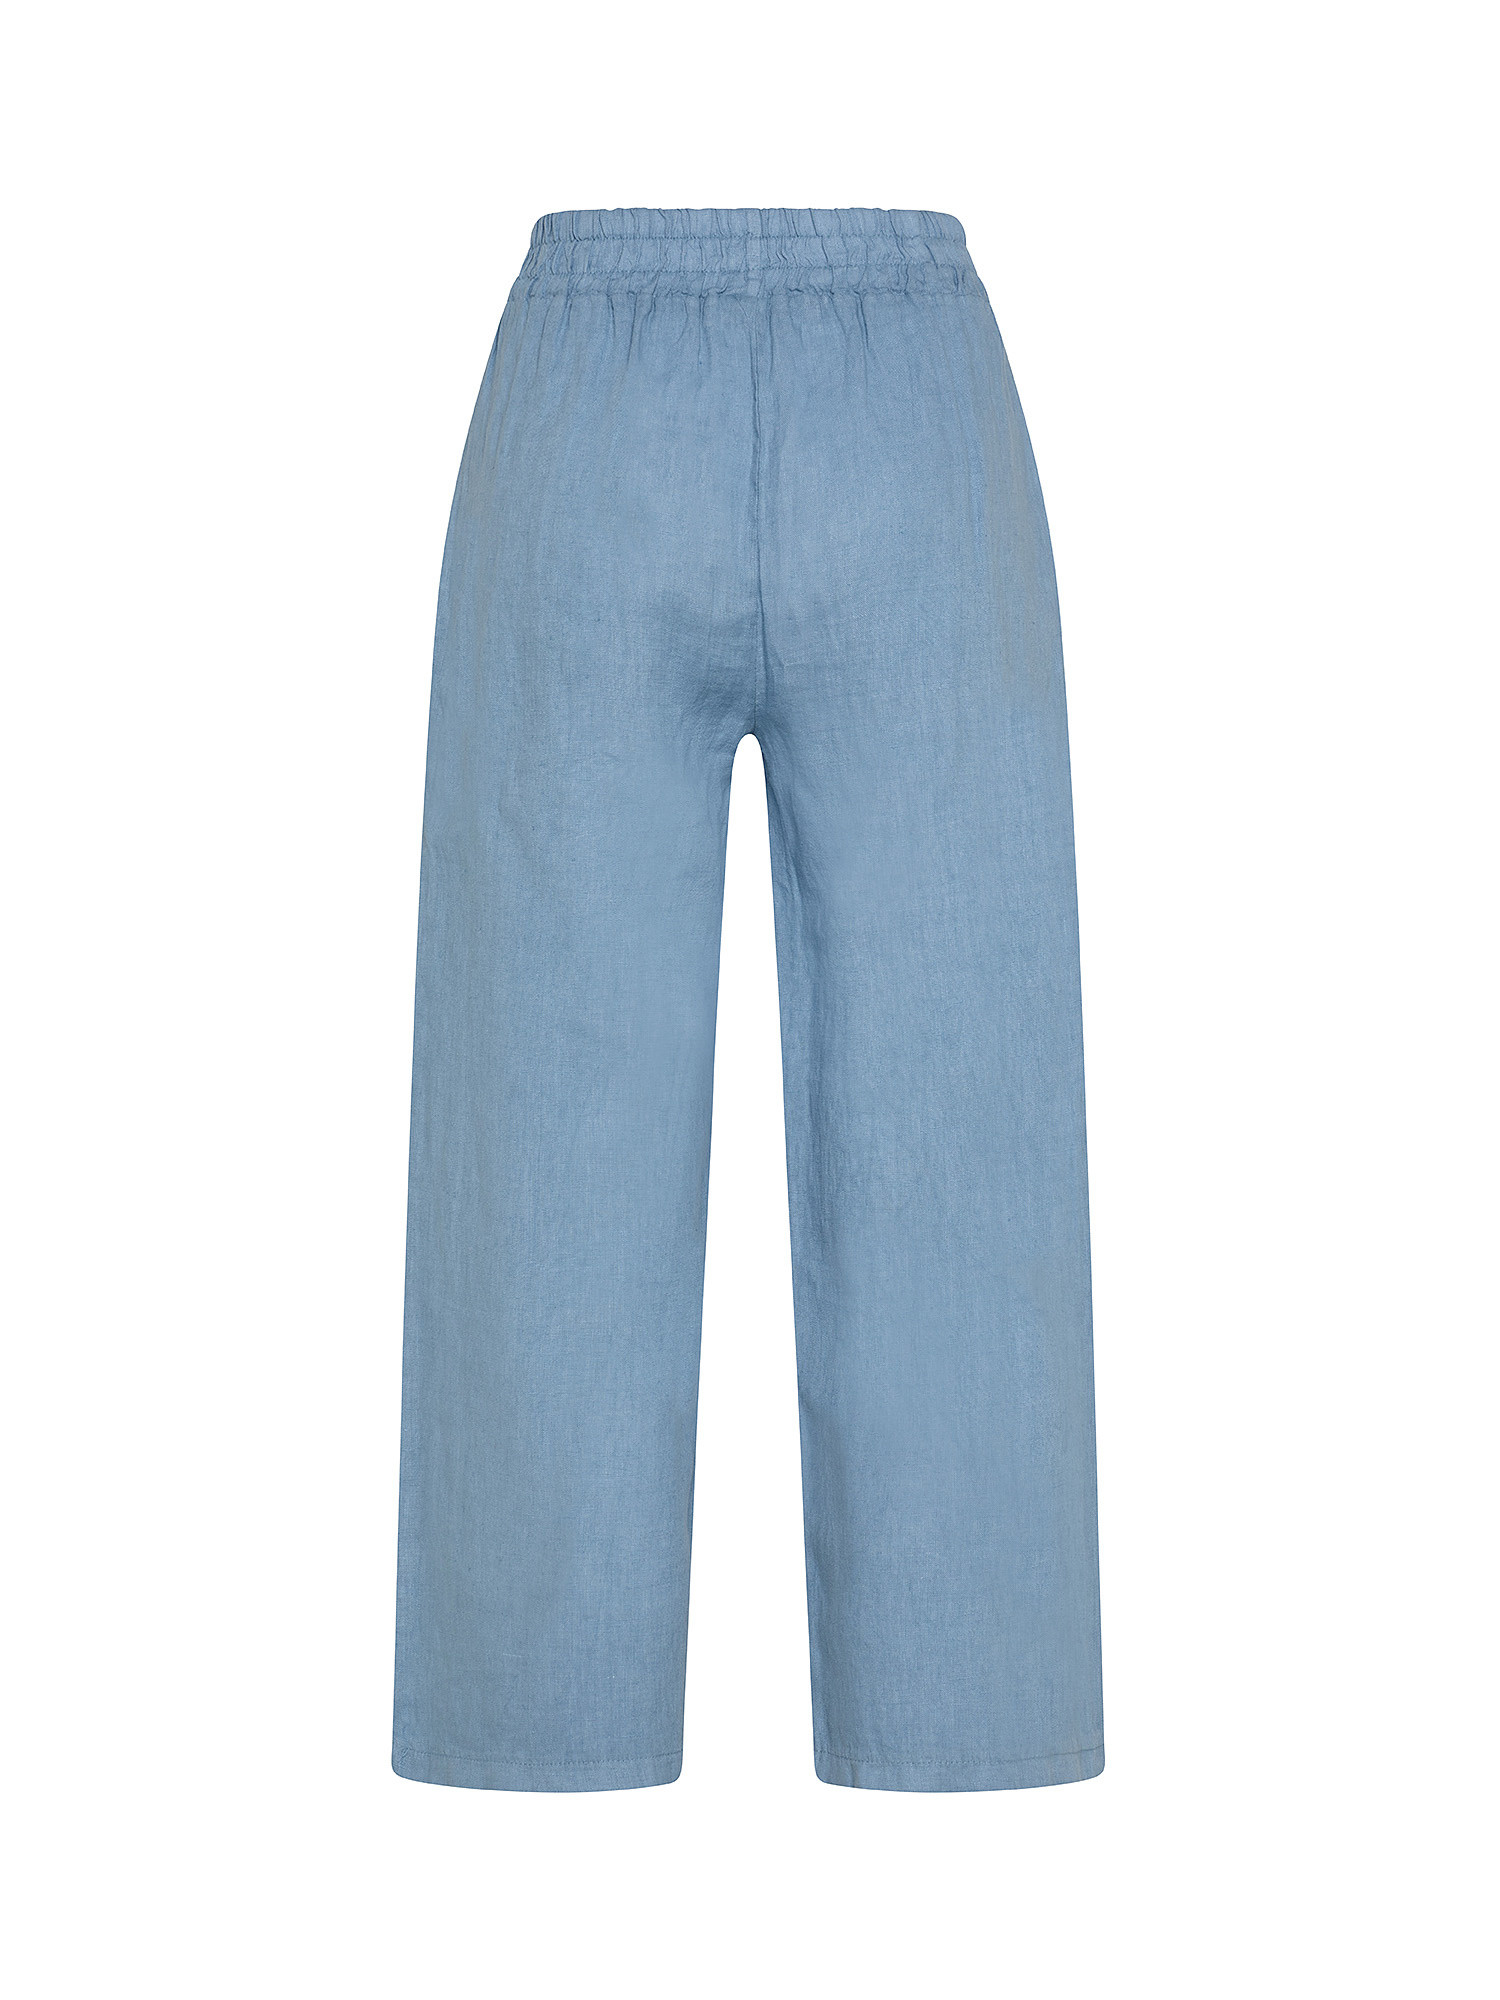 Pure linen trousers with sash, Light Blue, large image number 1